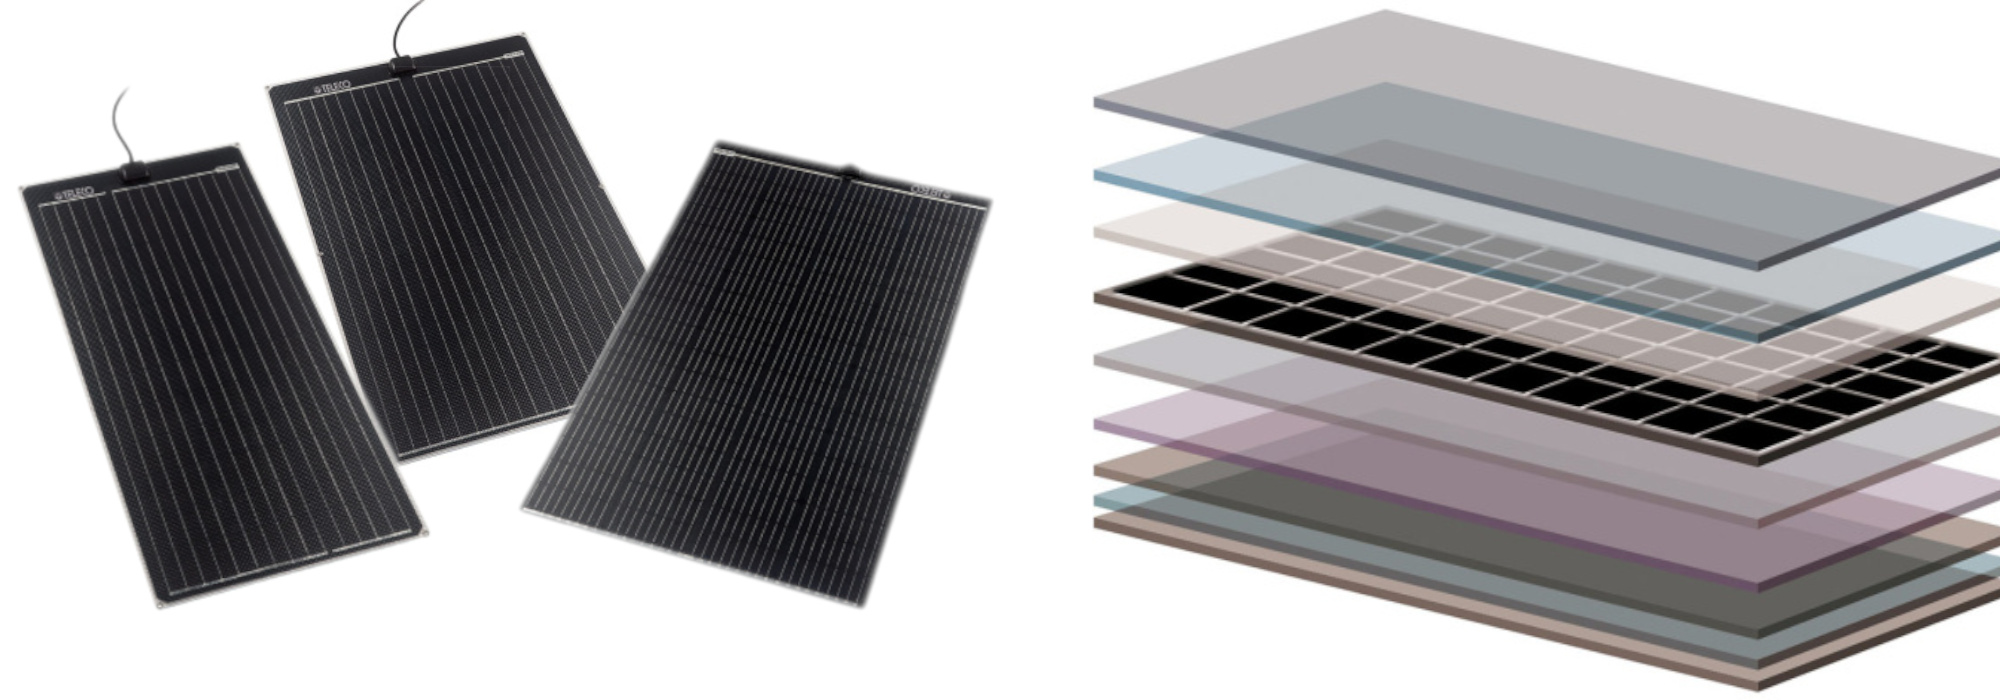 Telair Black Coolflex flexible solar panels: powerful, light and strong